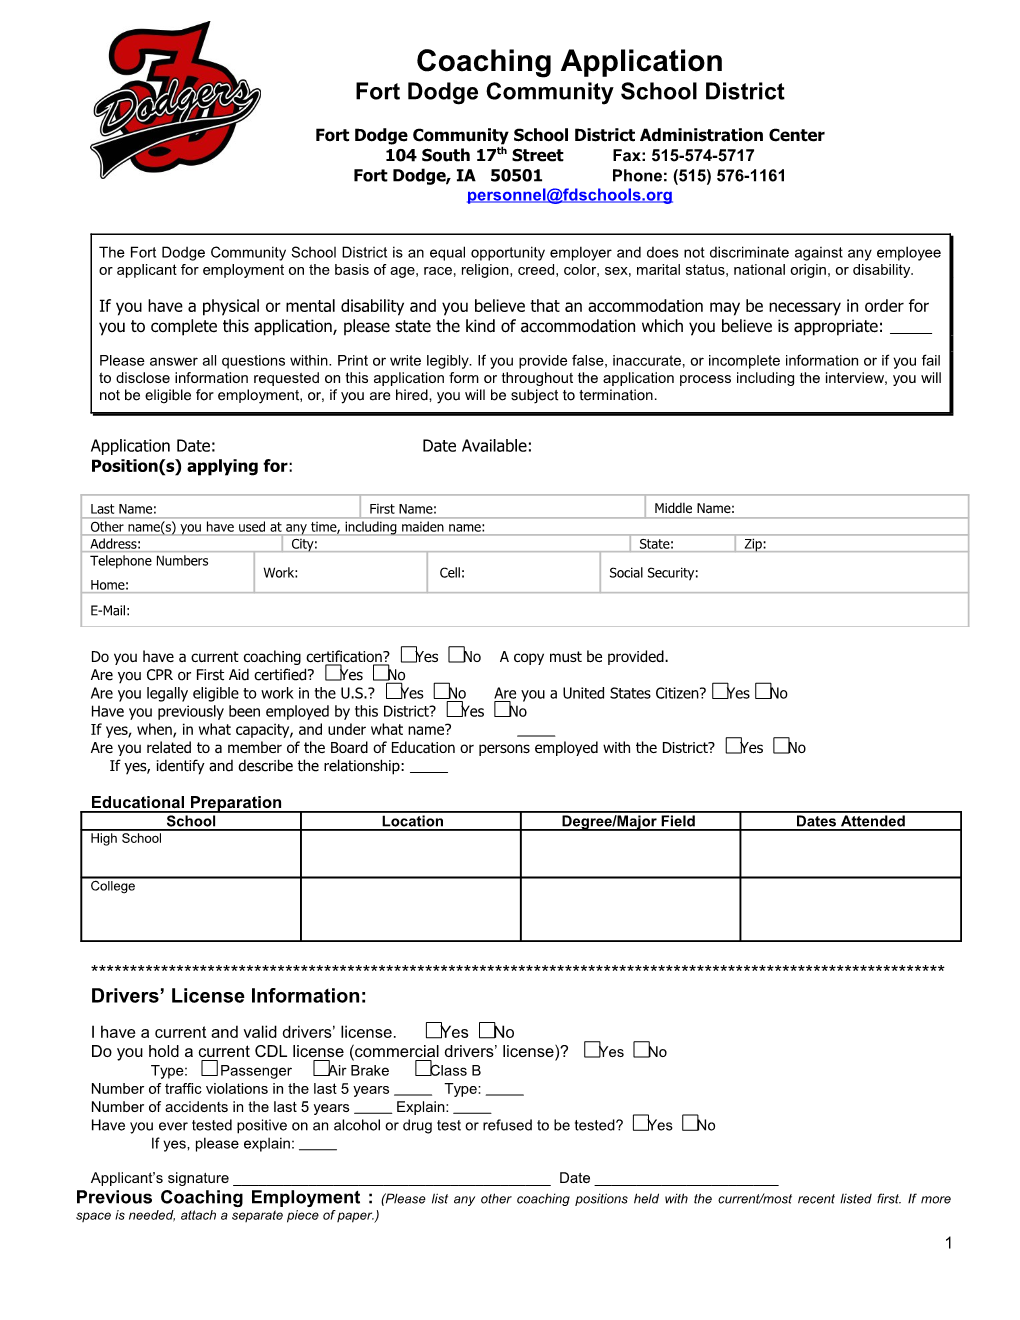 Classified Staff Application s1